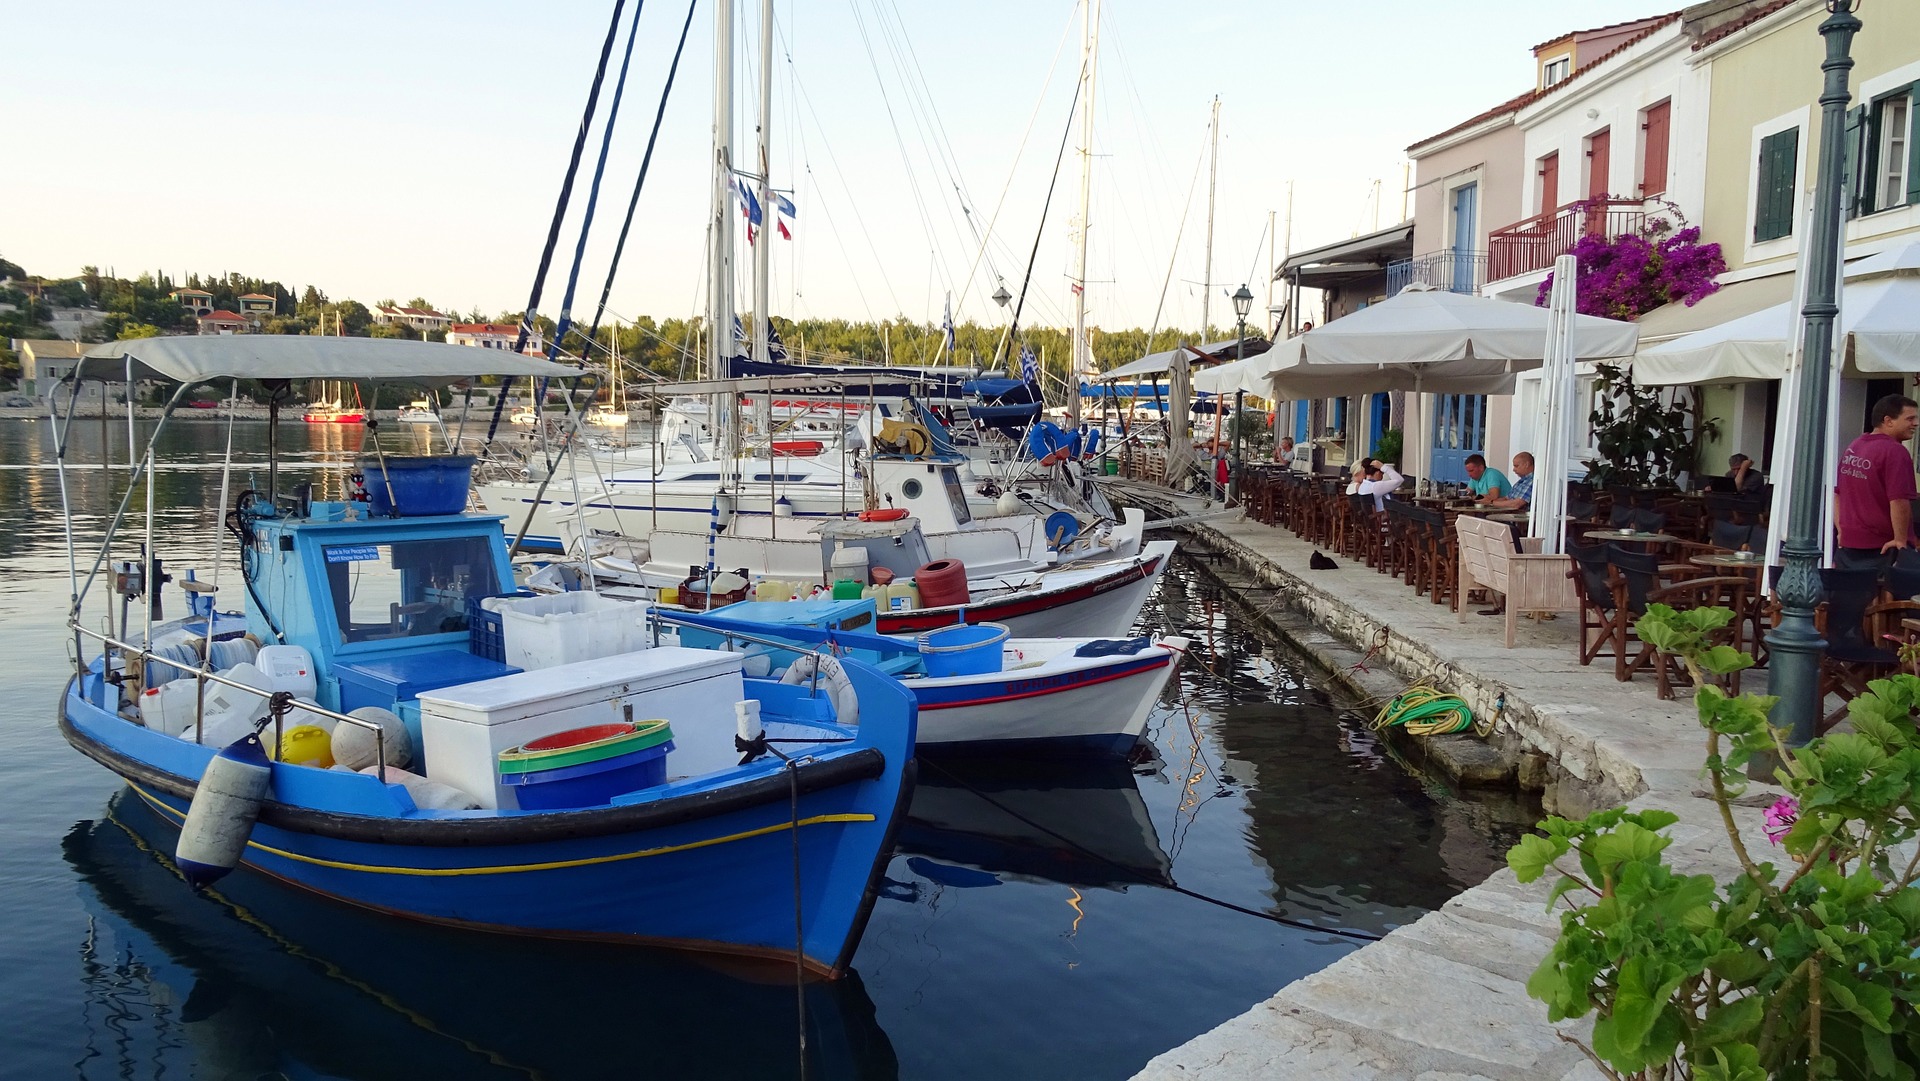 Fiscardo harbour, downloaded from the Internet